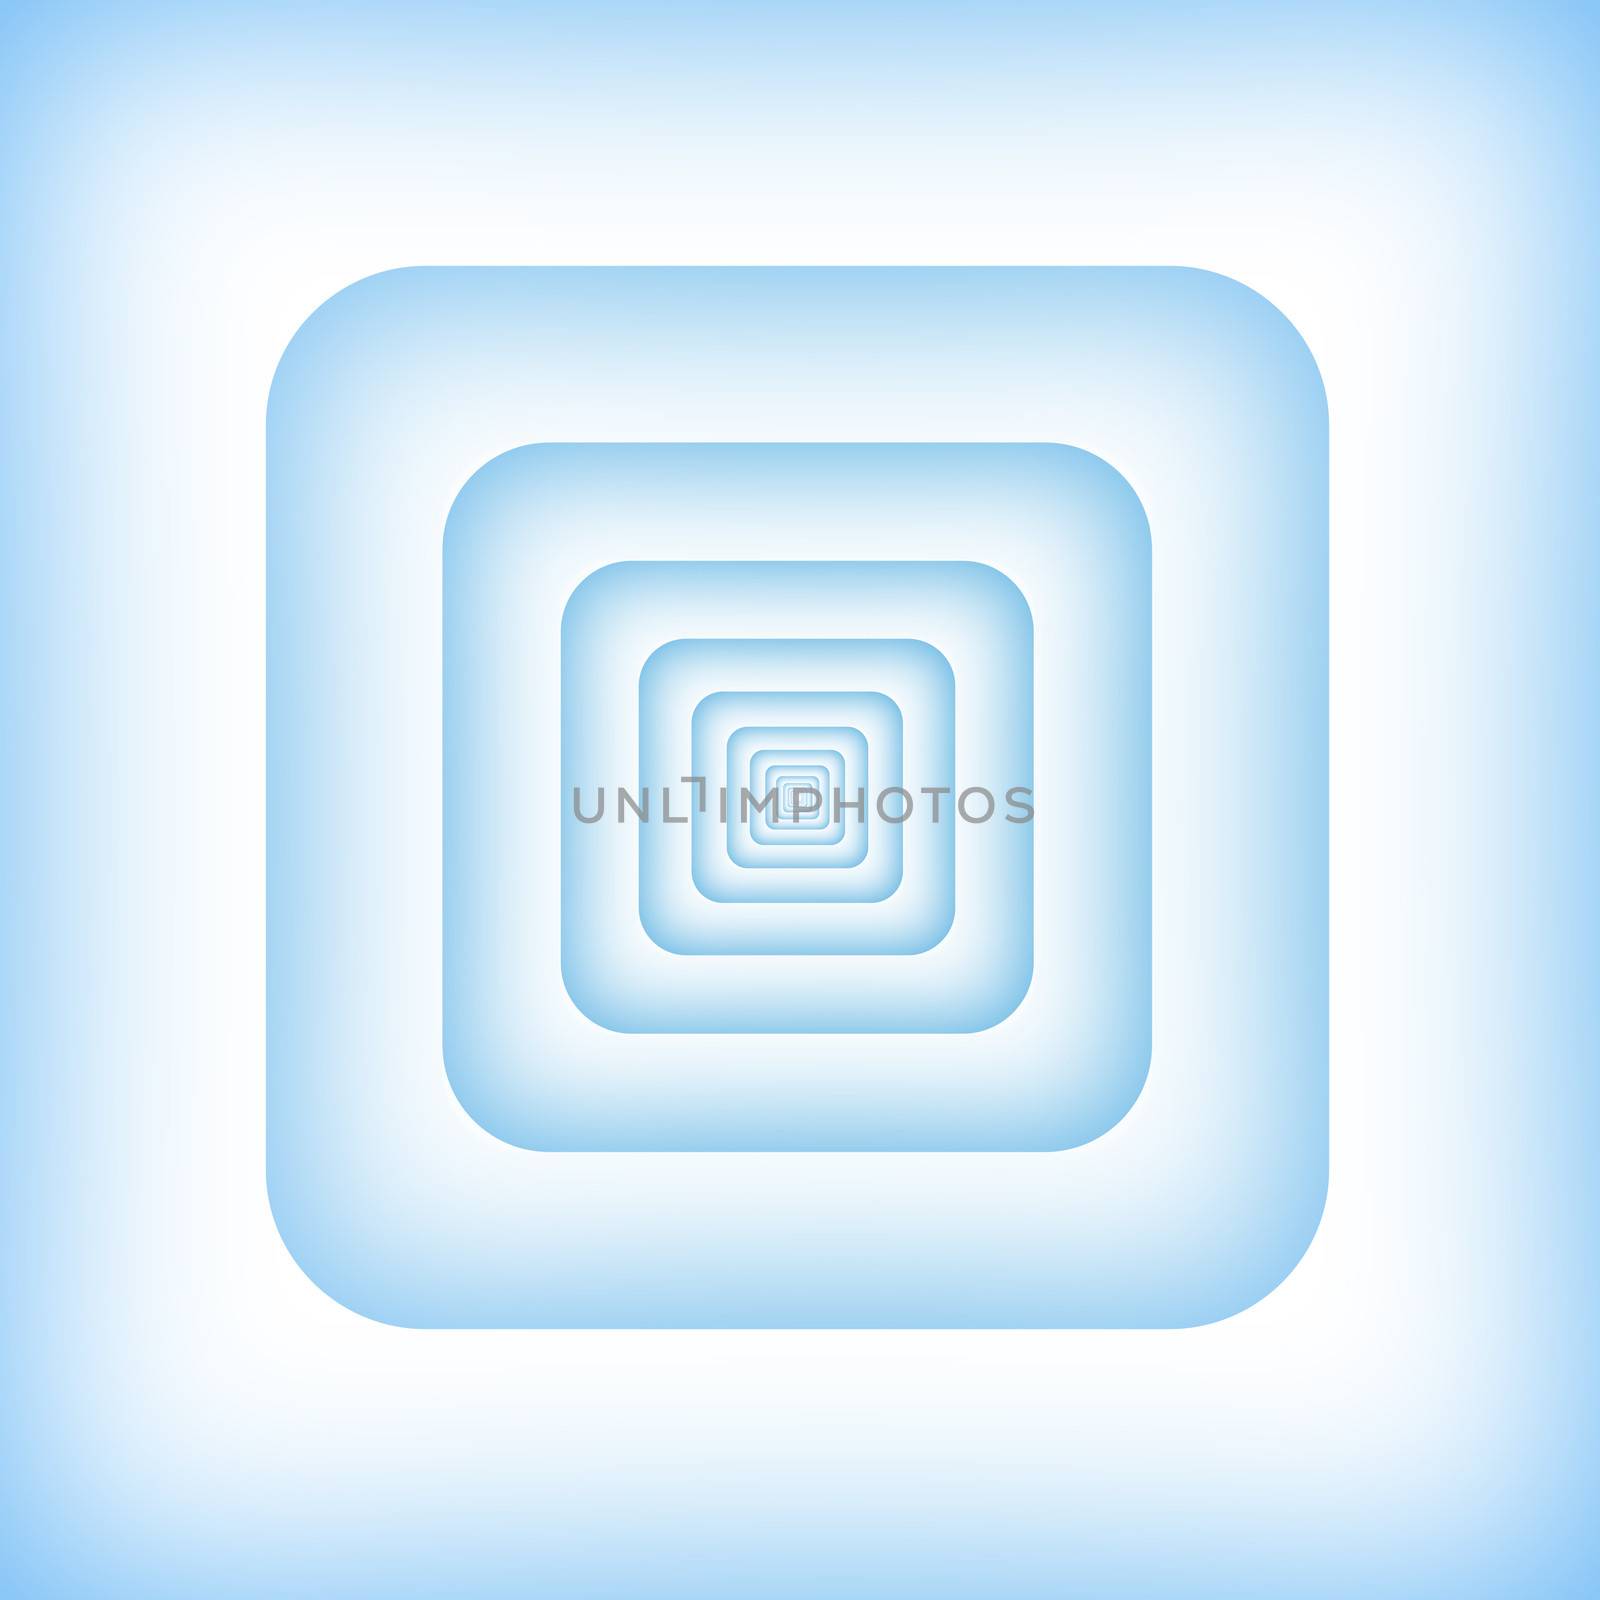 Abstract futuristic background. Blue rectangles. Element corporate and web design